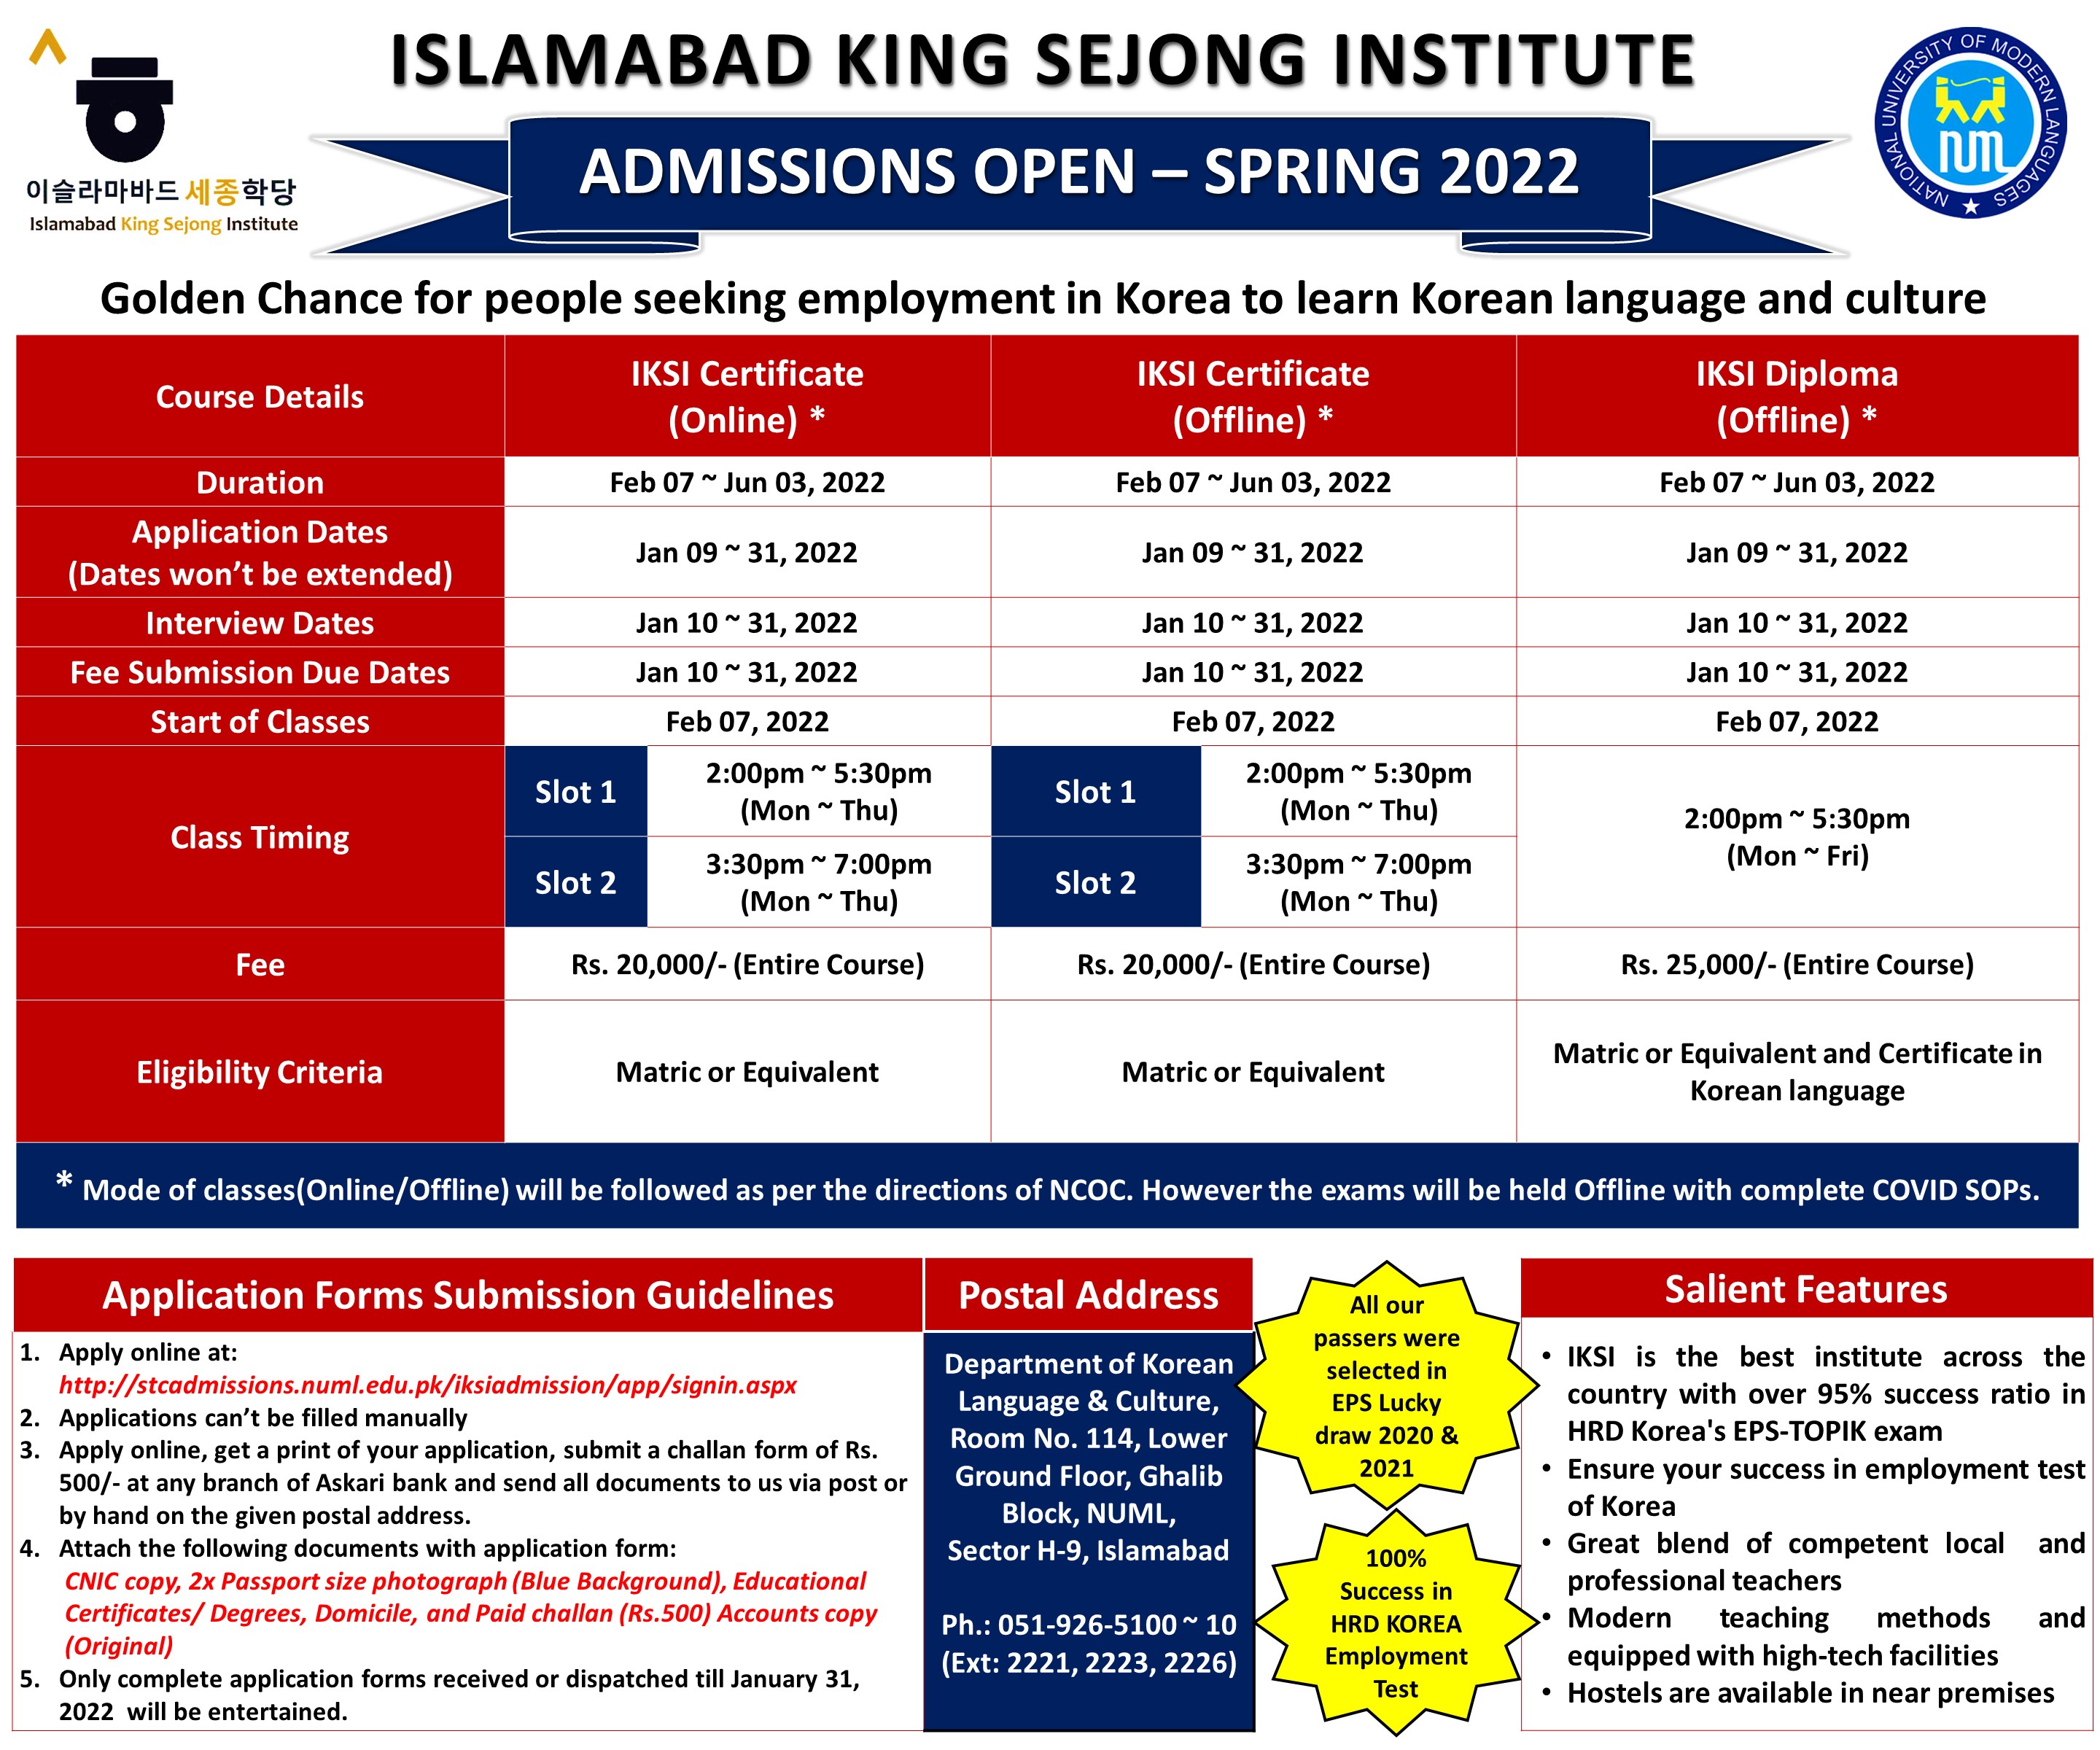 ISLAMABAD KING SEJONG INSTITUTE - ADMISSIONS OPEN SPRING 2022